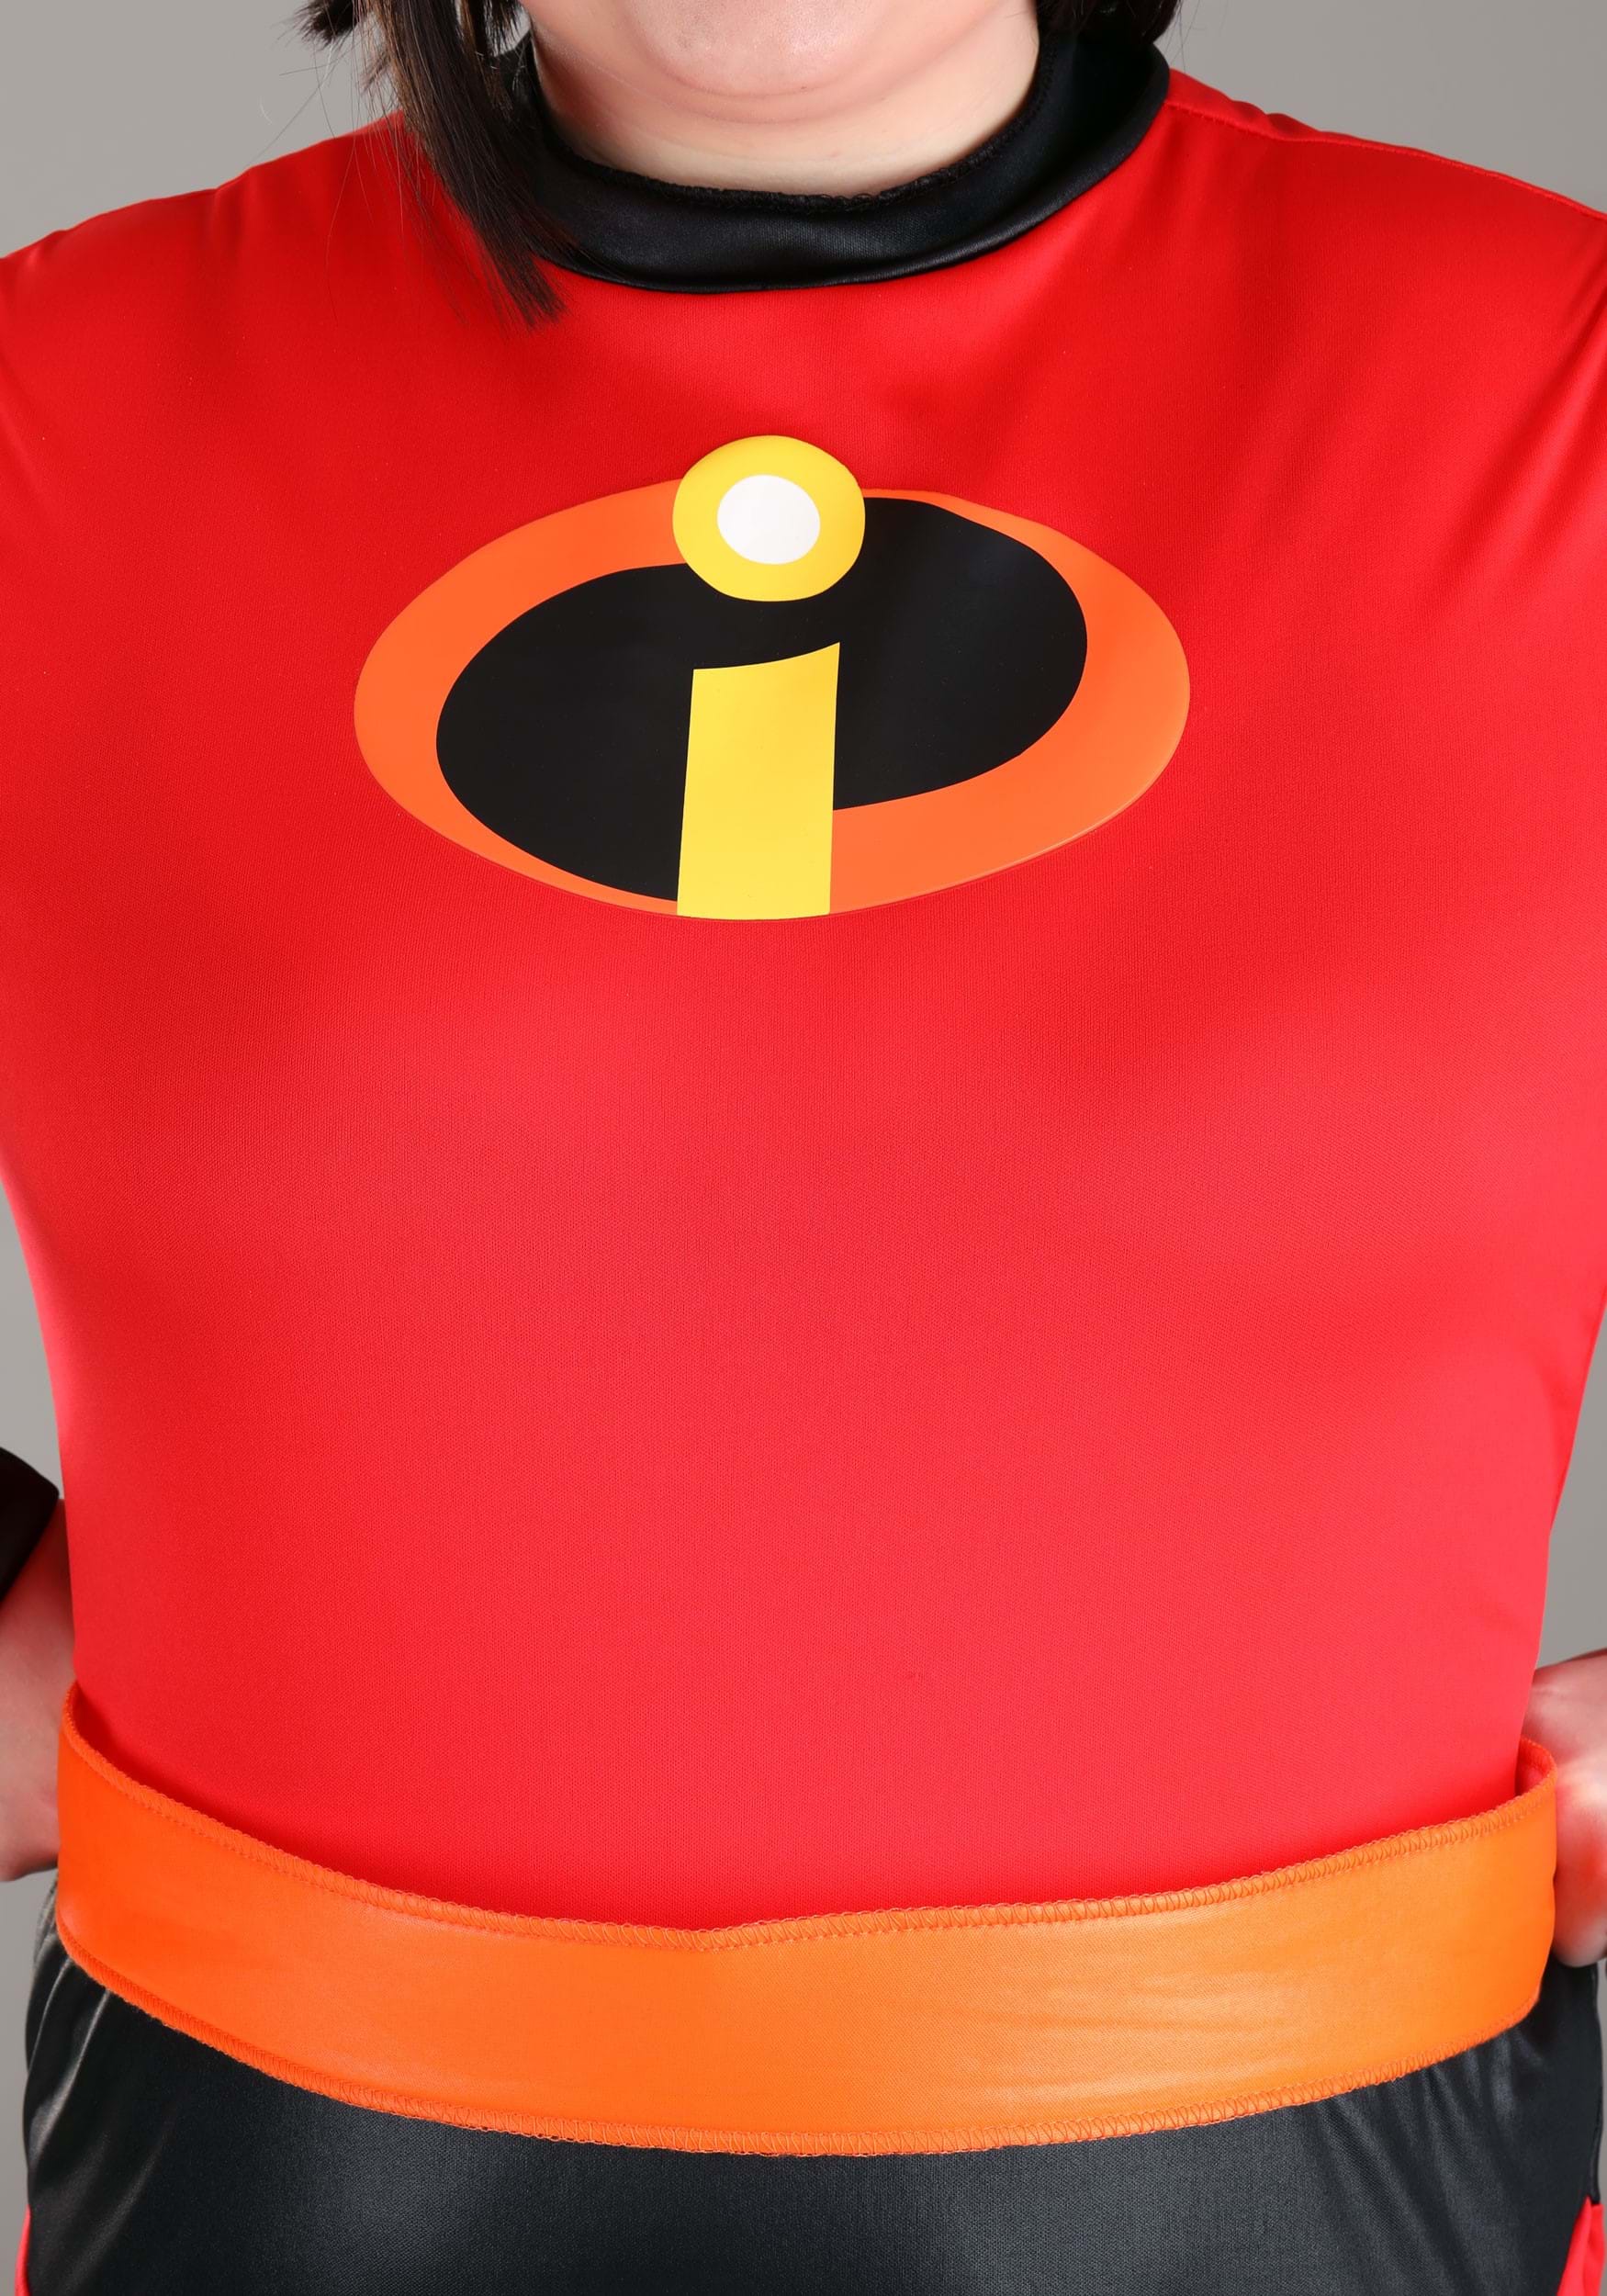 Incredibles 2 Classic Adult Plus Size Mrs. Incredible Fancy Dress Costume